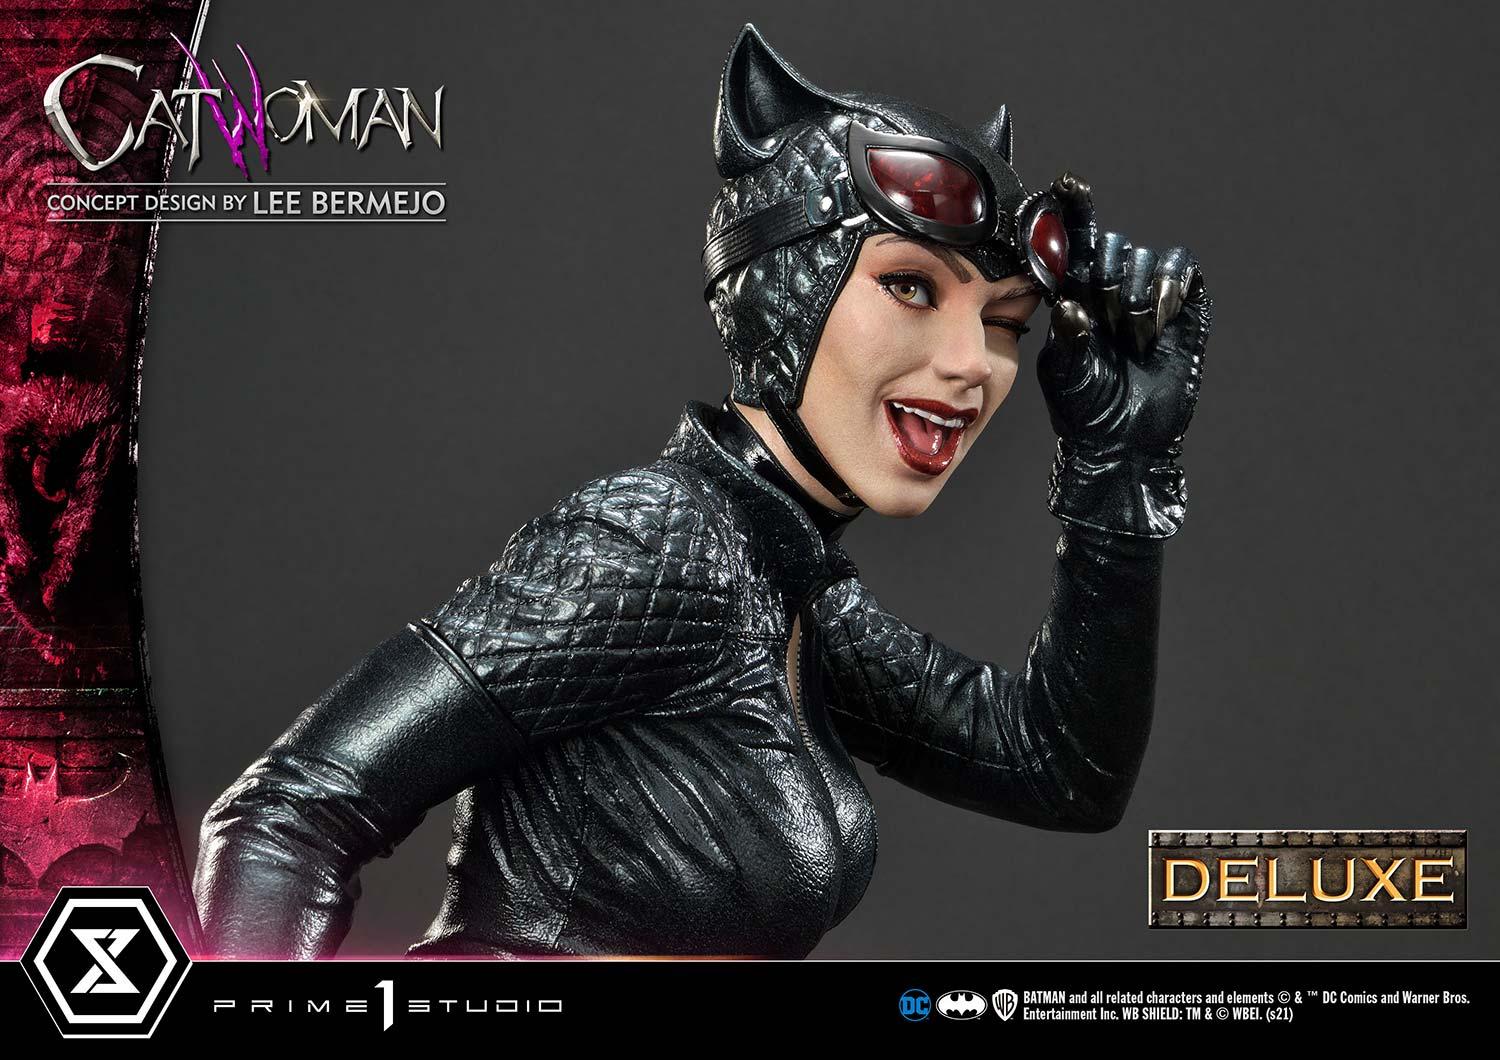 Rubie's Women's Catwoman Deluxe Goggles Mask